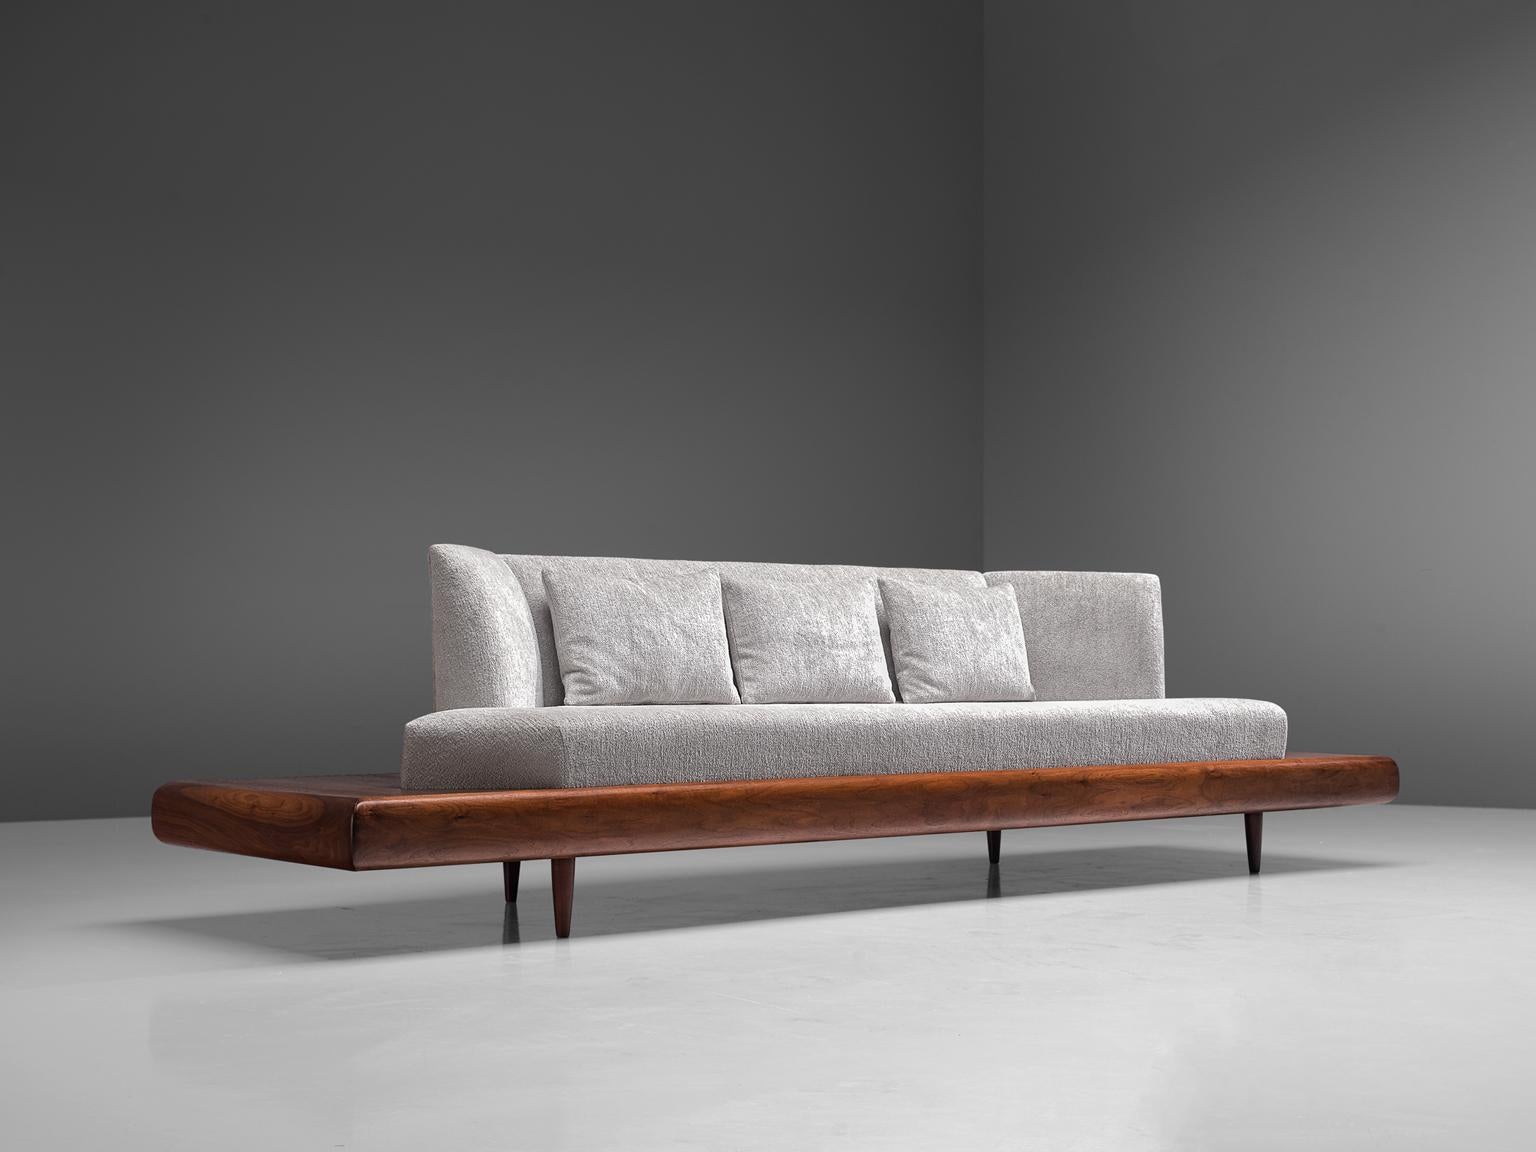 Mid-Century Modern Adrian Pearsall 'Platform' Sofa Reupholstered in Pierre Frey Fabric